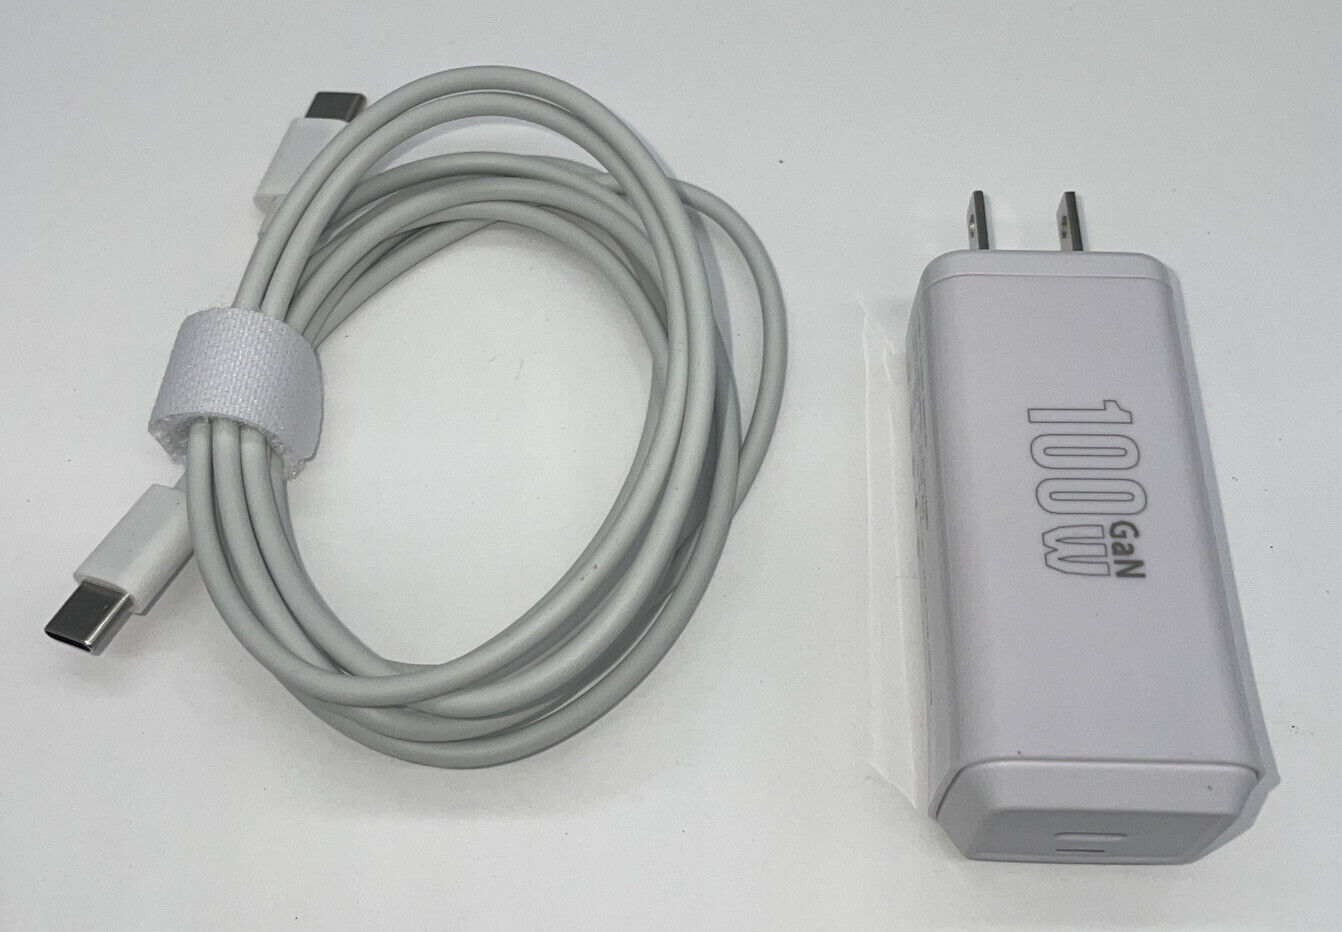 Macbook Pro USB C Charger 100W GAN with USB C Cable QC3.0 PD3.0 - US Seller